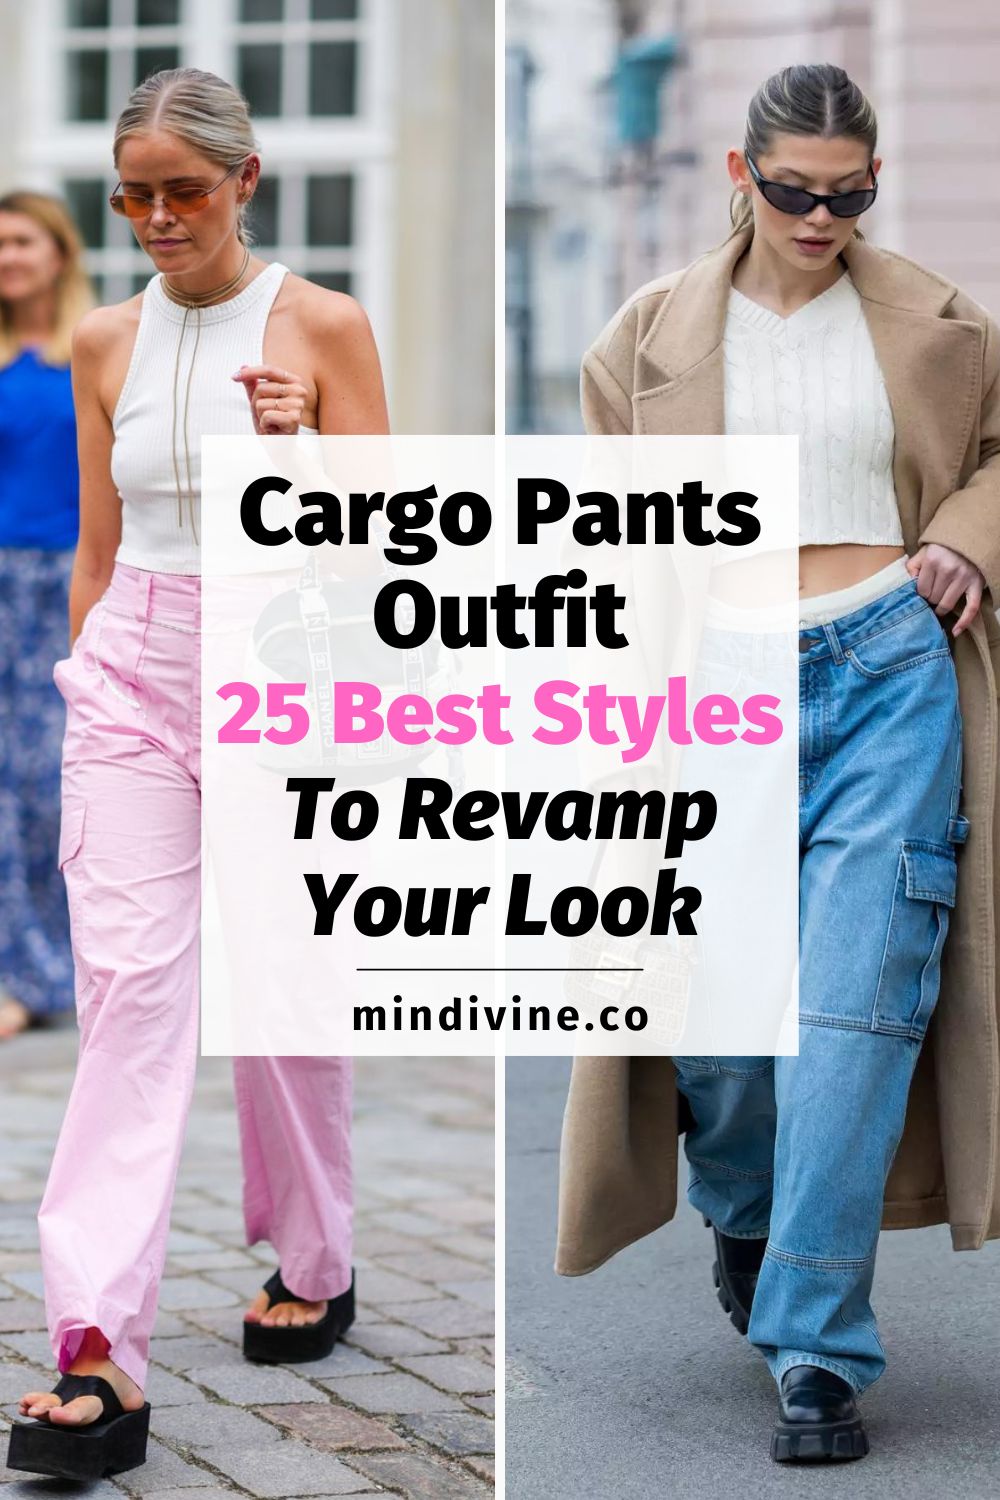 Cargo Pants Outfit: 2 chic tyles